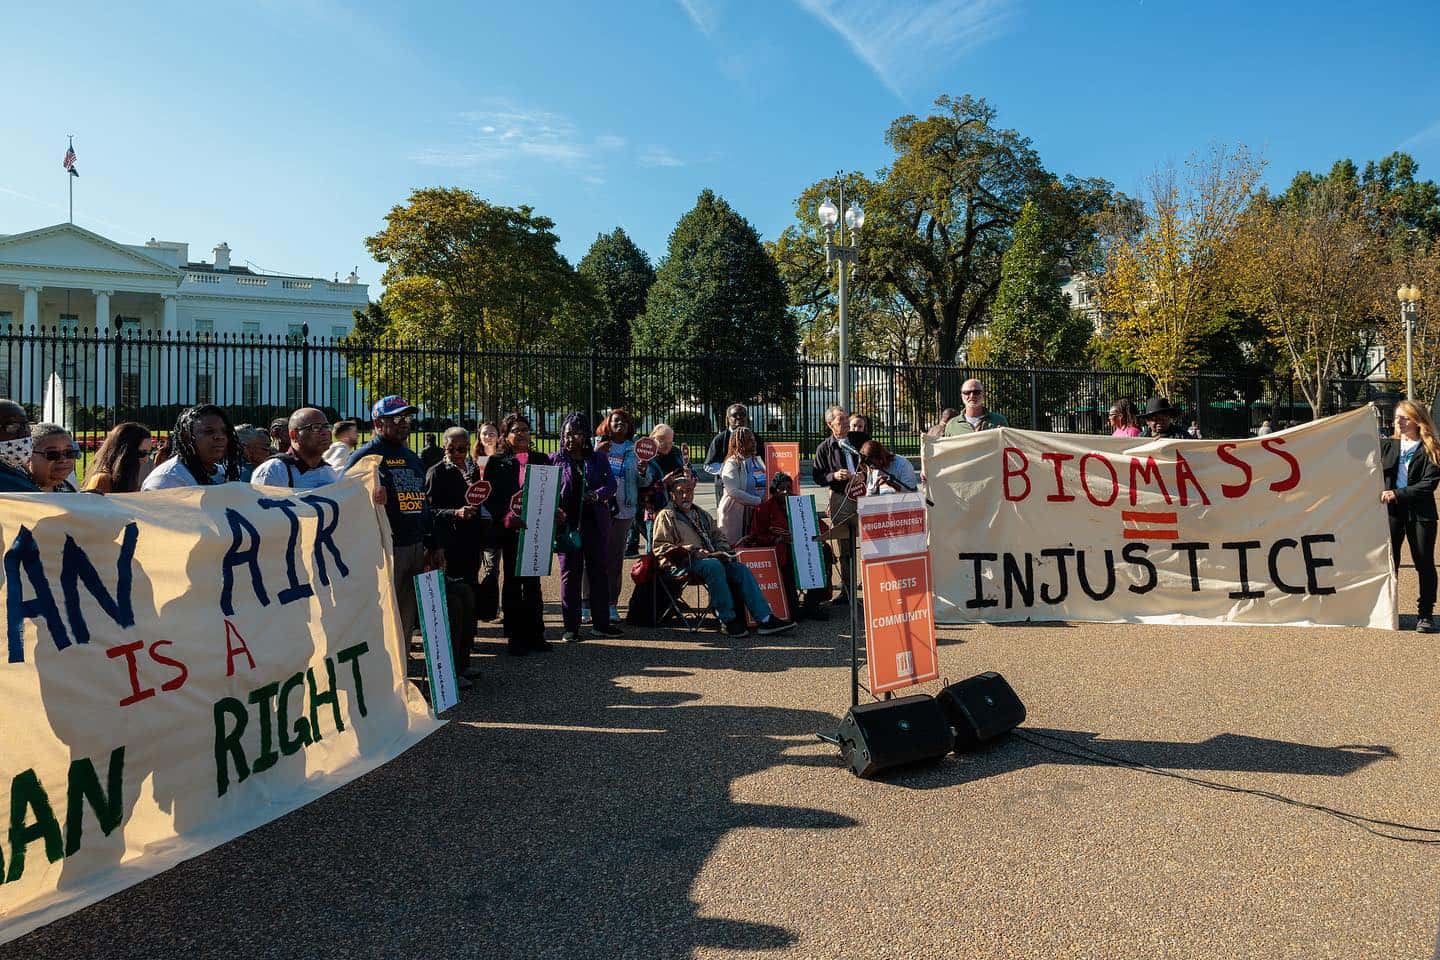 A group of protesters gathered behind signs that read "Biomass = Injustice."